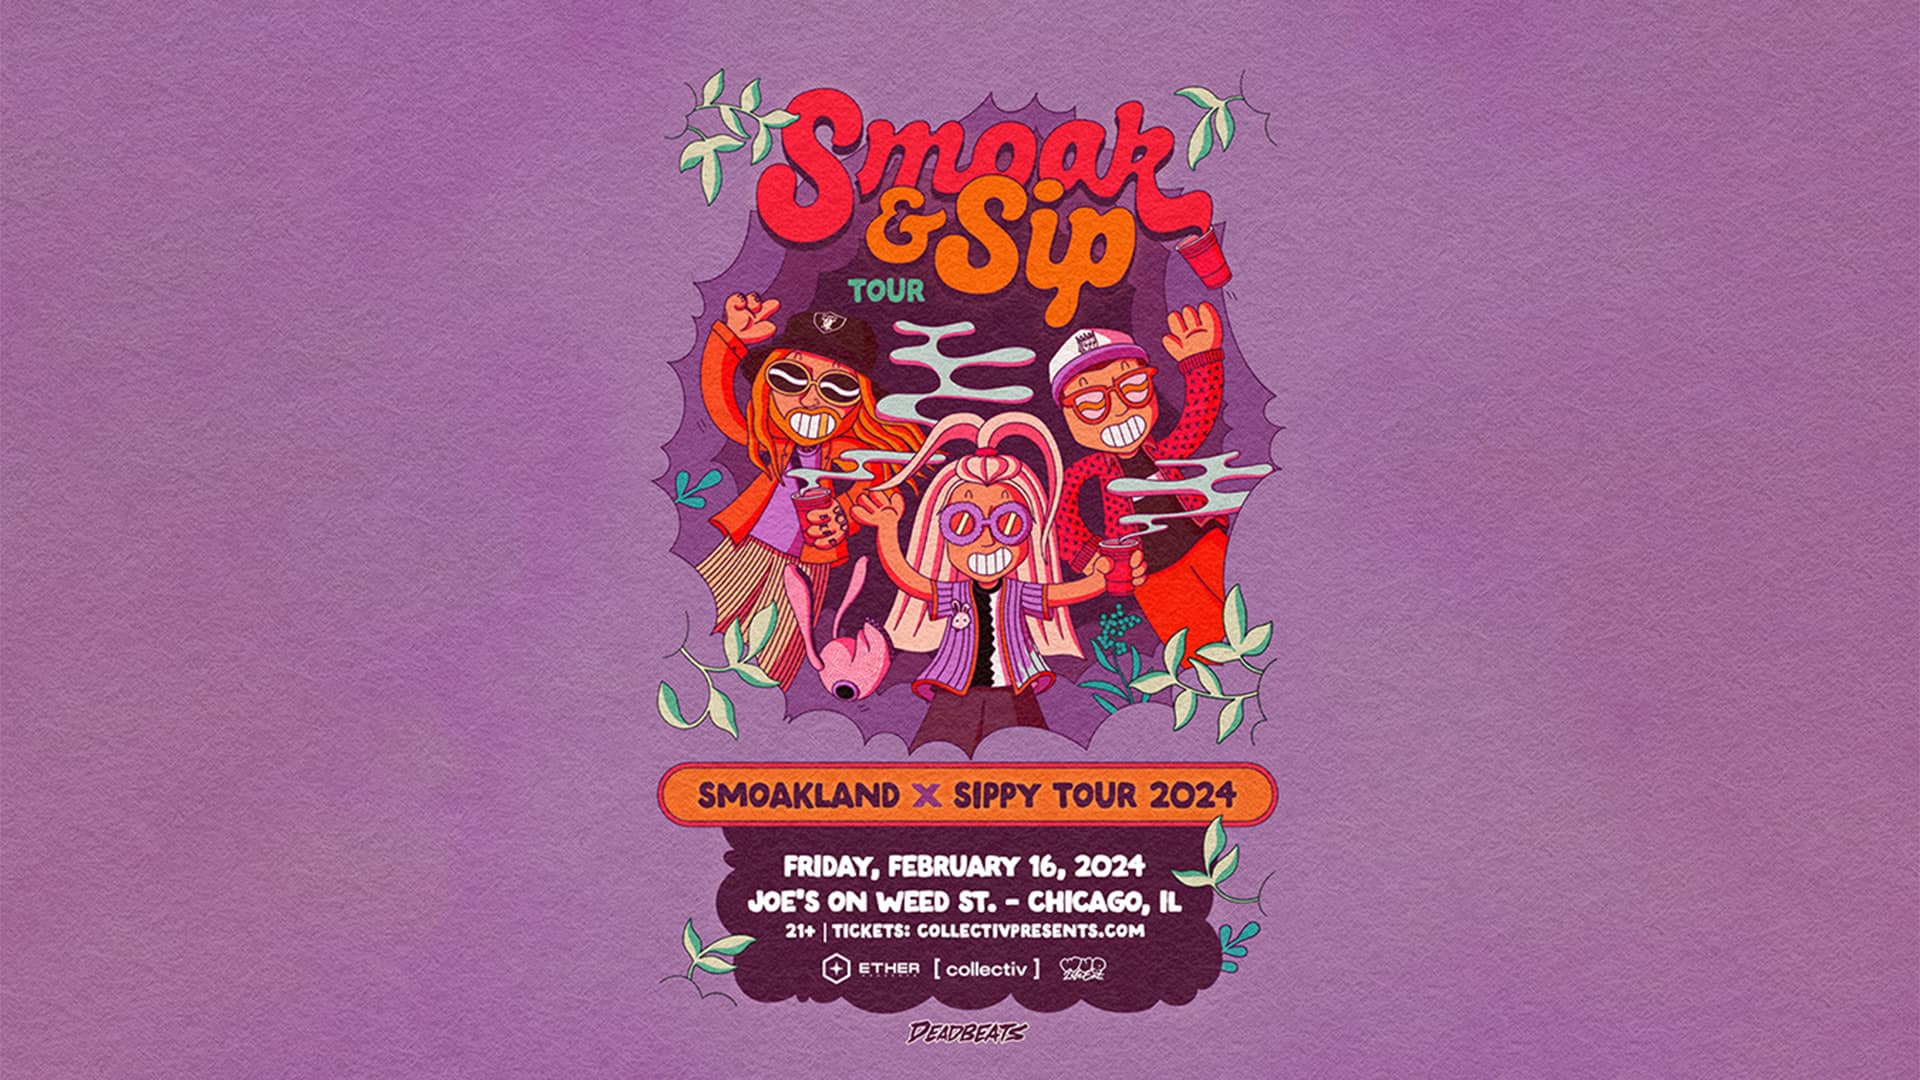 Poster for Smoak & Sip: Smoakland X Sippy Tour 2024, presented by Collectiv, on February 16, 2024 at Joe's on Weed St.